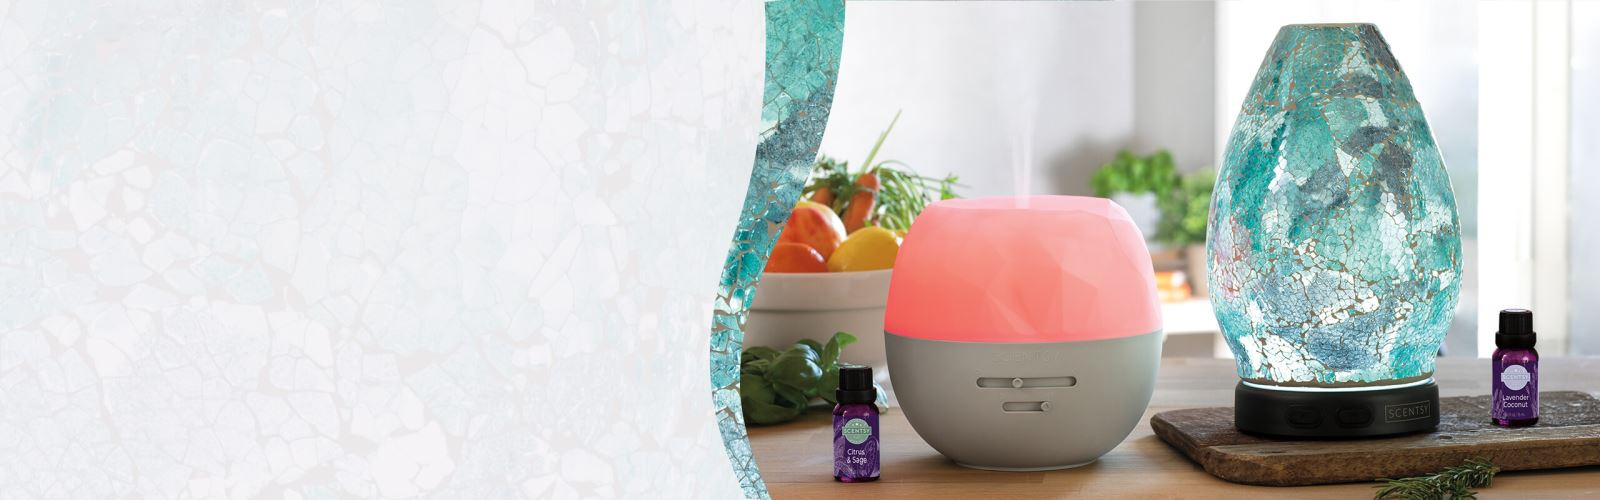 Scentsy UK Diffusers & Oils